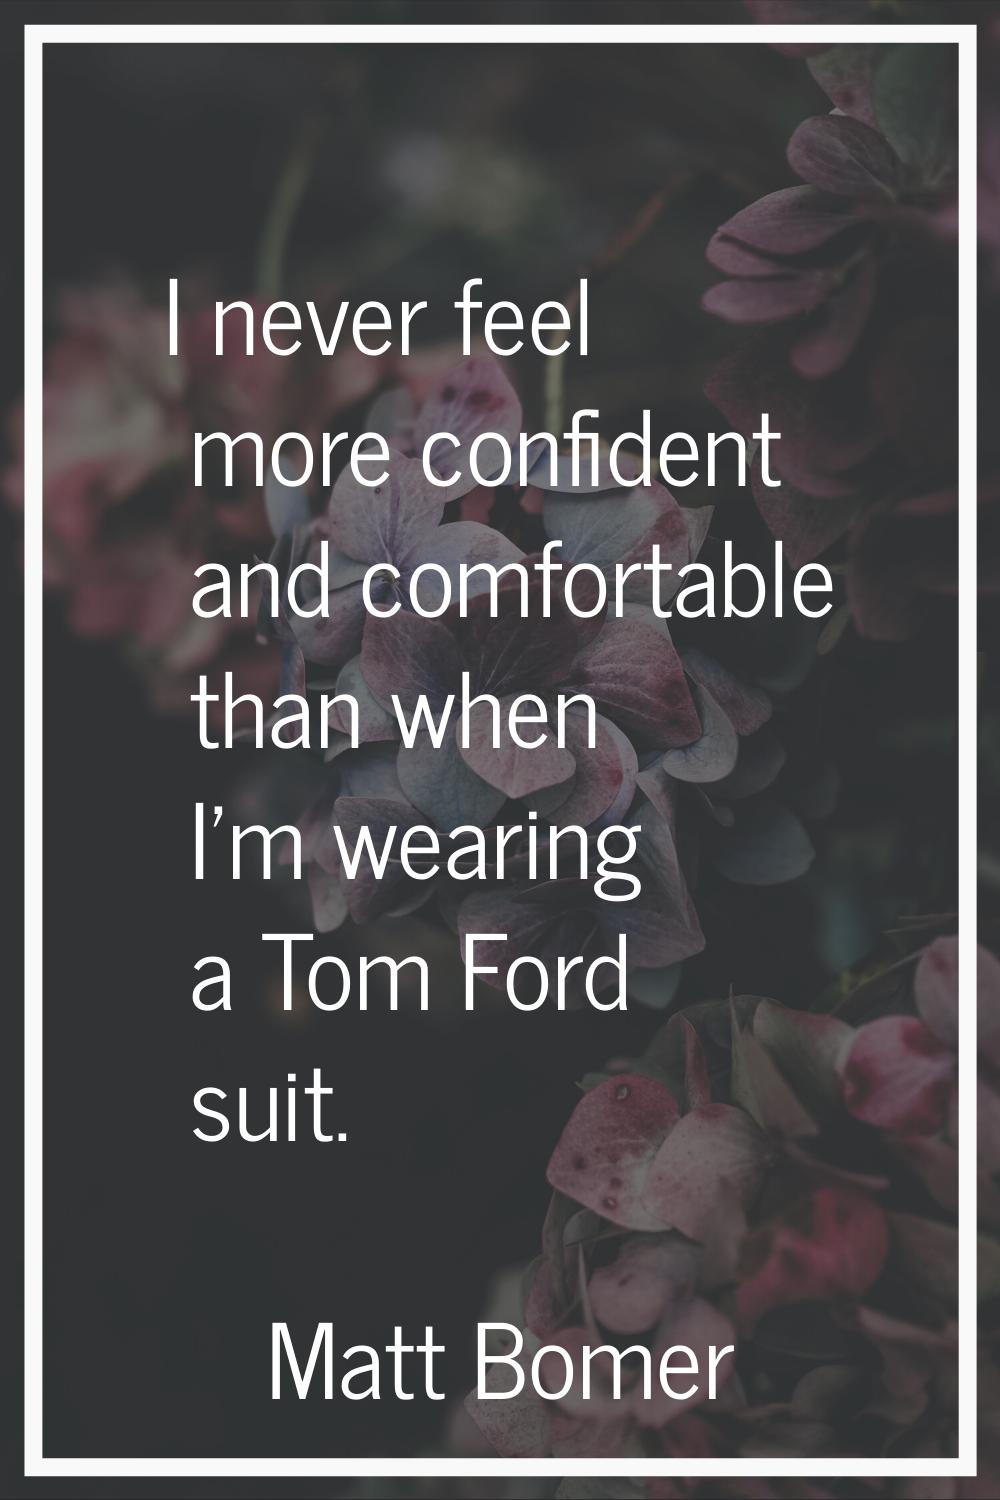 I never feel more confident and comfortable than when I'm wearing a Tom Ford suit.